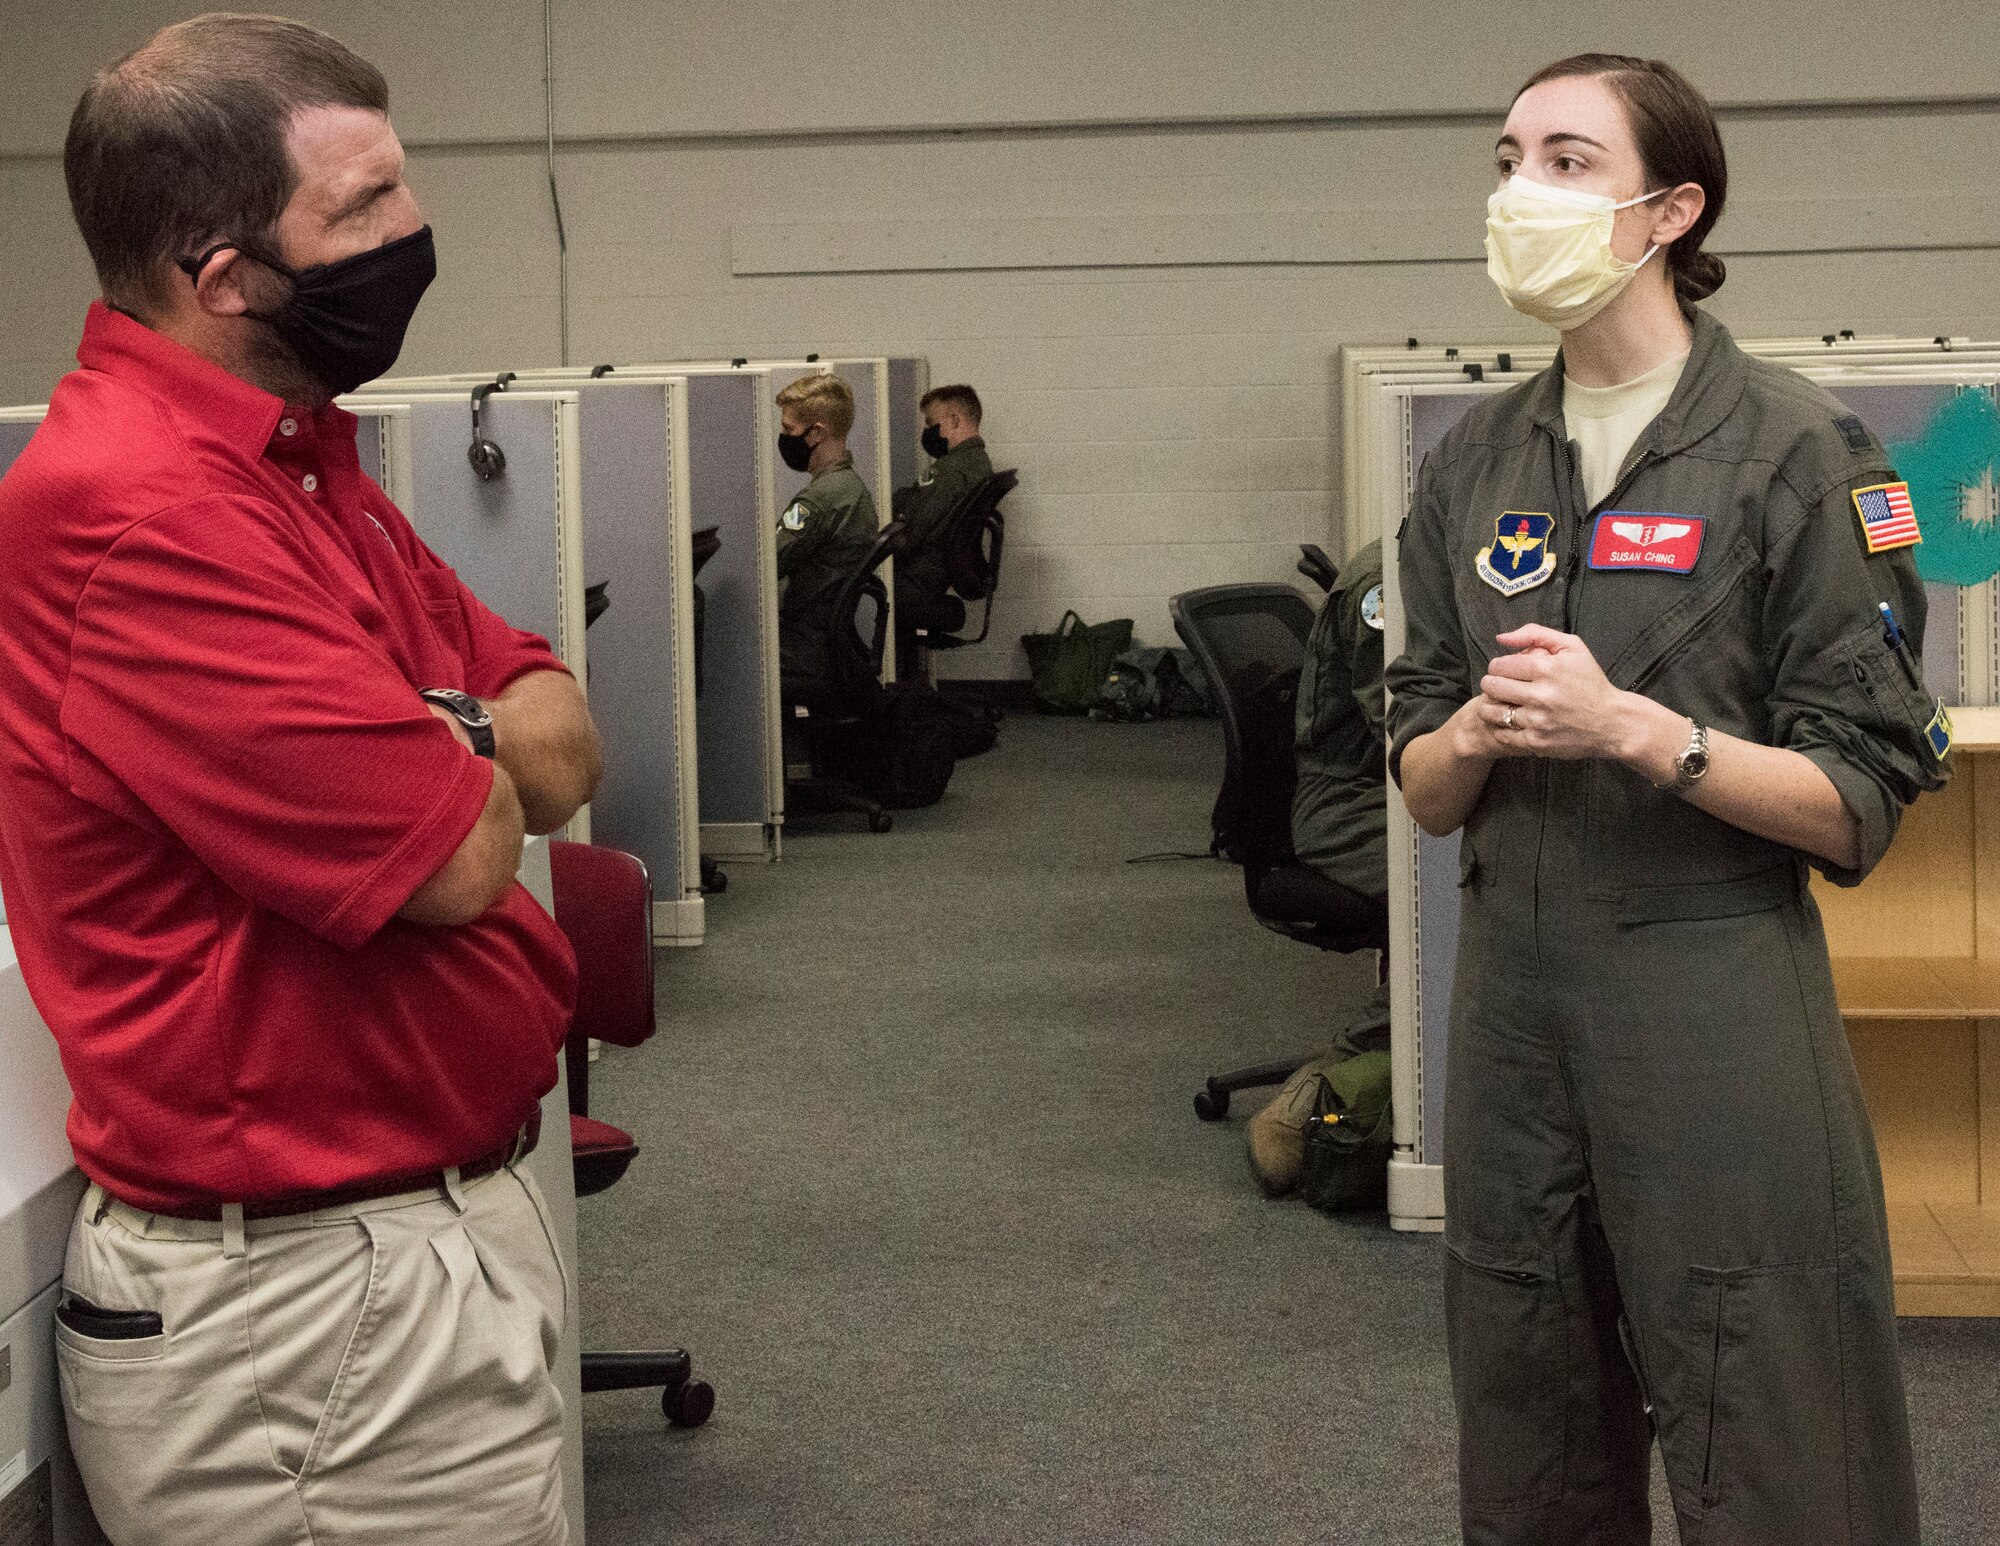 Cap. Susan Ching, 47th Flying Training Wing public health and emergency officer, explains possible measures to prevent COVID-19 in the simulation building to Jim DeReus, 47th Operations Group T-6 lead civilian simulator instructor, at Laughlin Air Force Base, Texas, Aug. 5, 2020. The Center for Disease Control says taking these precautions are the best way to prevent catching COVID-19, and, not only are these methods good for preventing the virus, but also other forms of infectious diseases and keeping the workplace safe. (U.S. Air Force Photo by Airman 1st Class David Phaff)